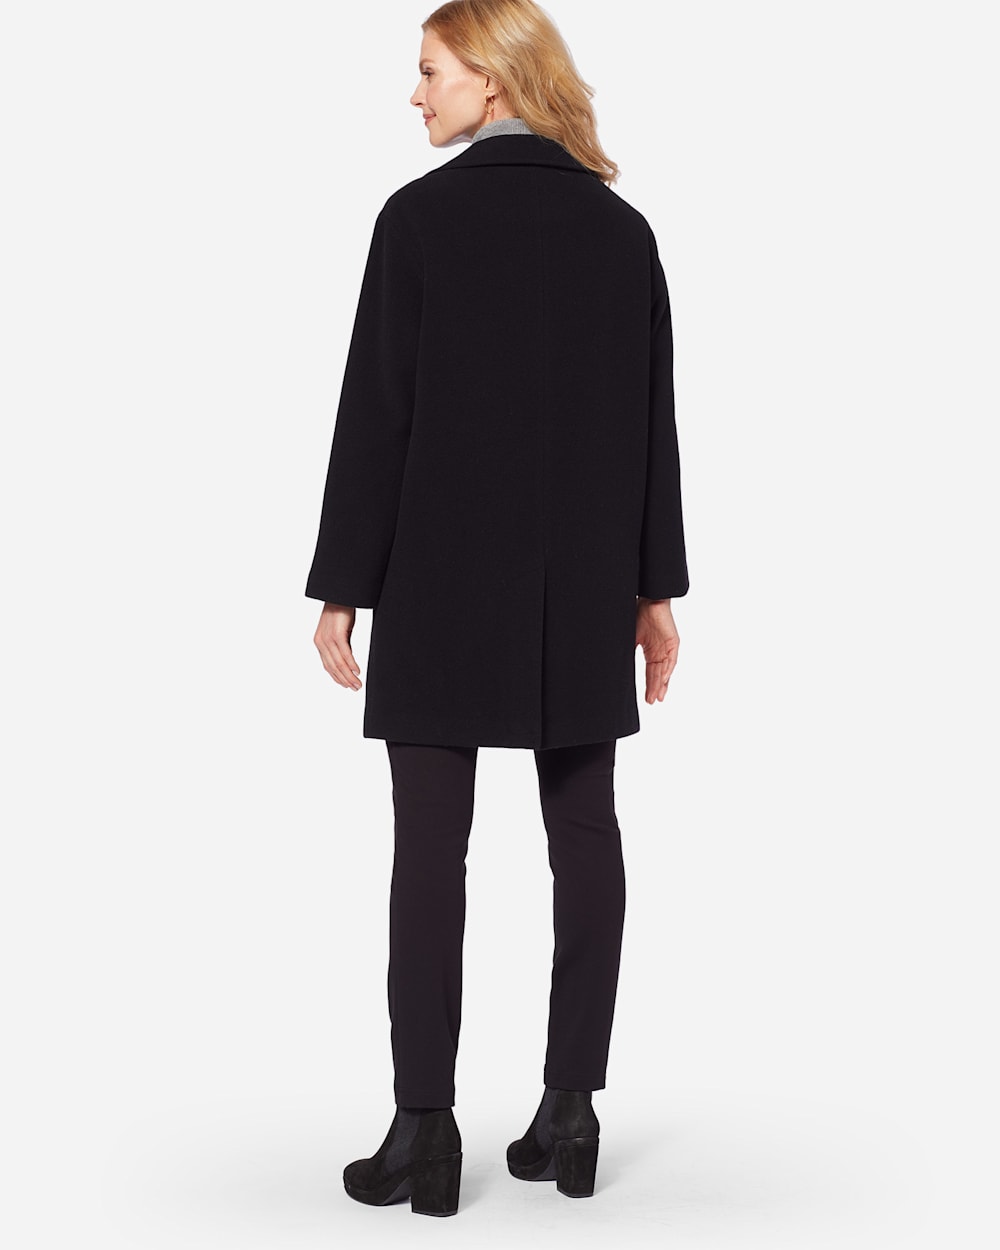 ADDITIONAL VIEW OF WOMEN'S TWO-BUTTON WALKER COAT IN BLACK image number 3